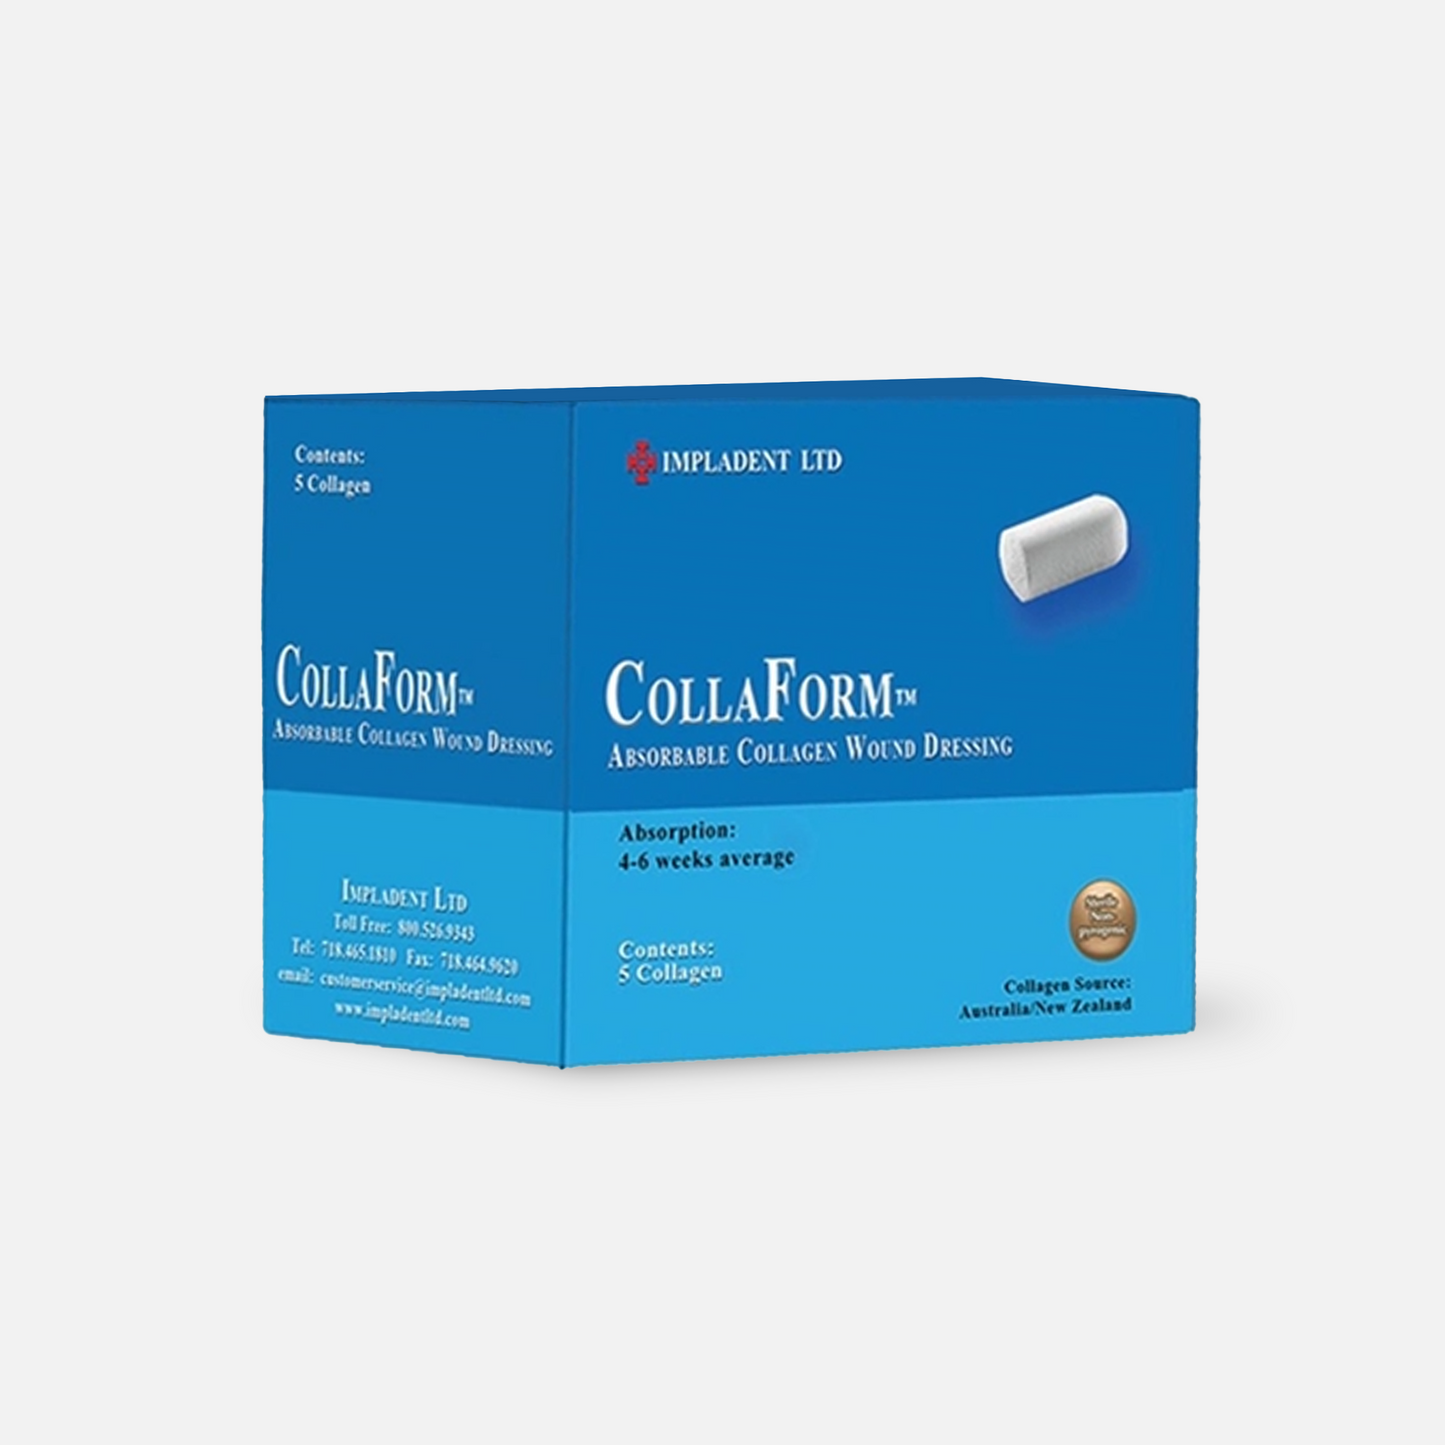 CollaForm® Collagen Wound Dressing Plugs - Box of 5